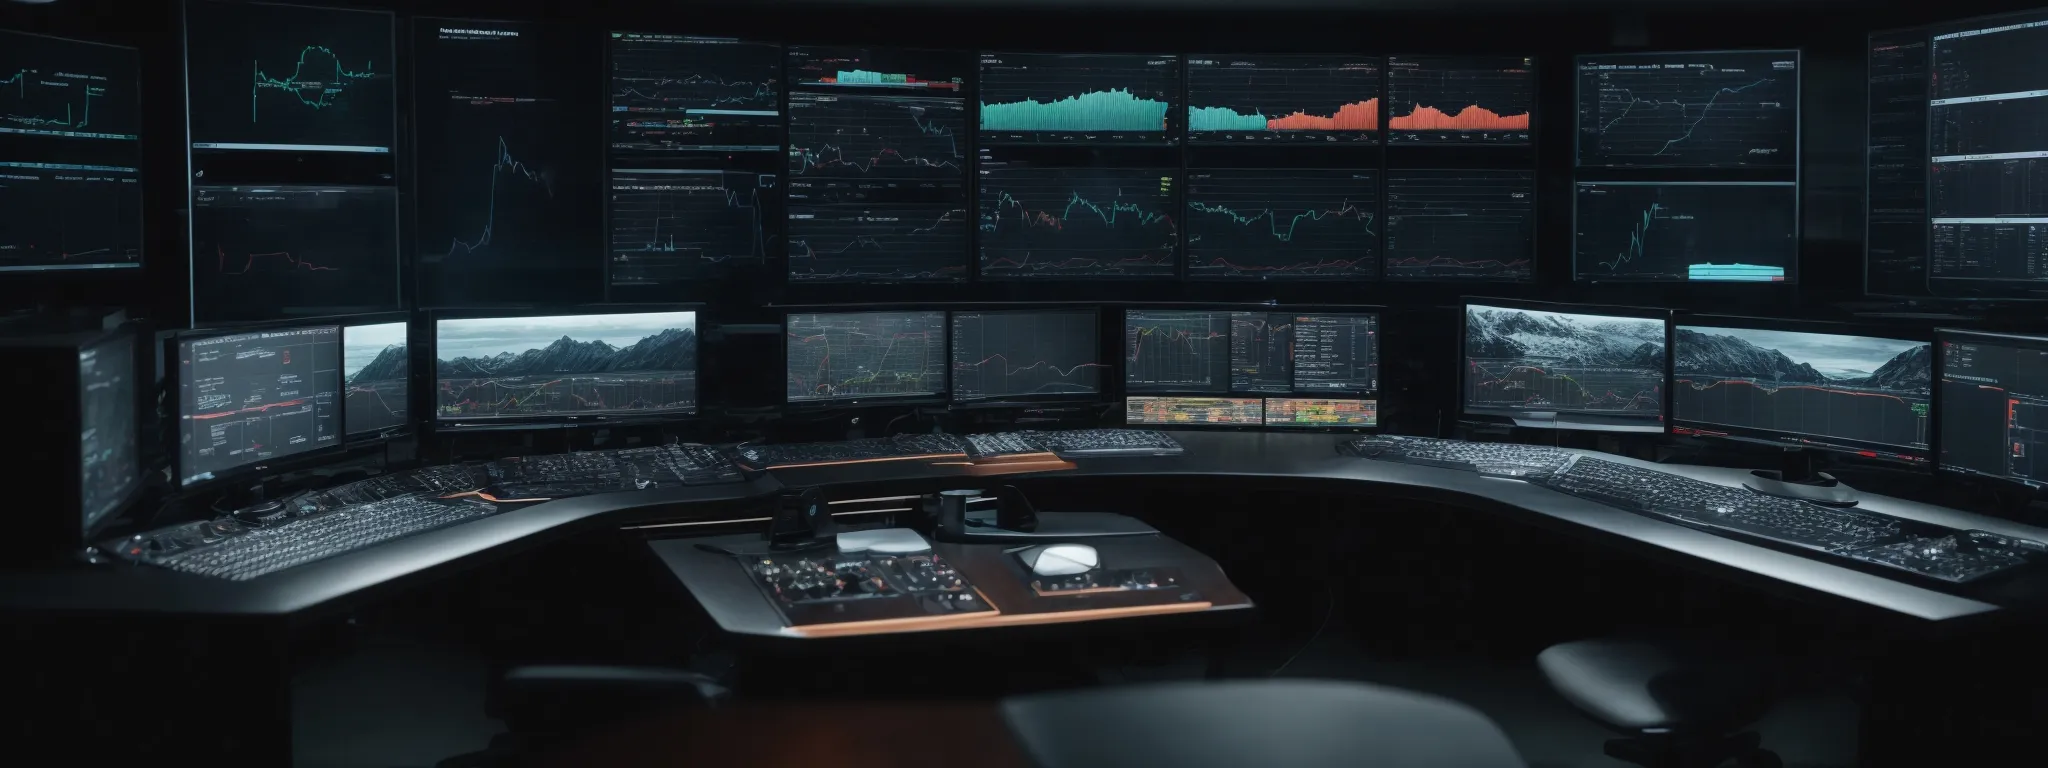 a sleek command center with multiple monitors displaying graphs and analytics dashboards.